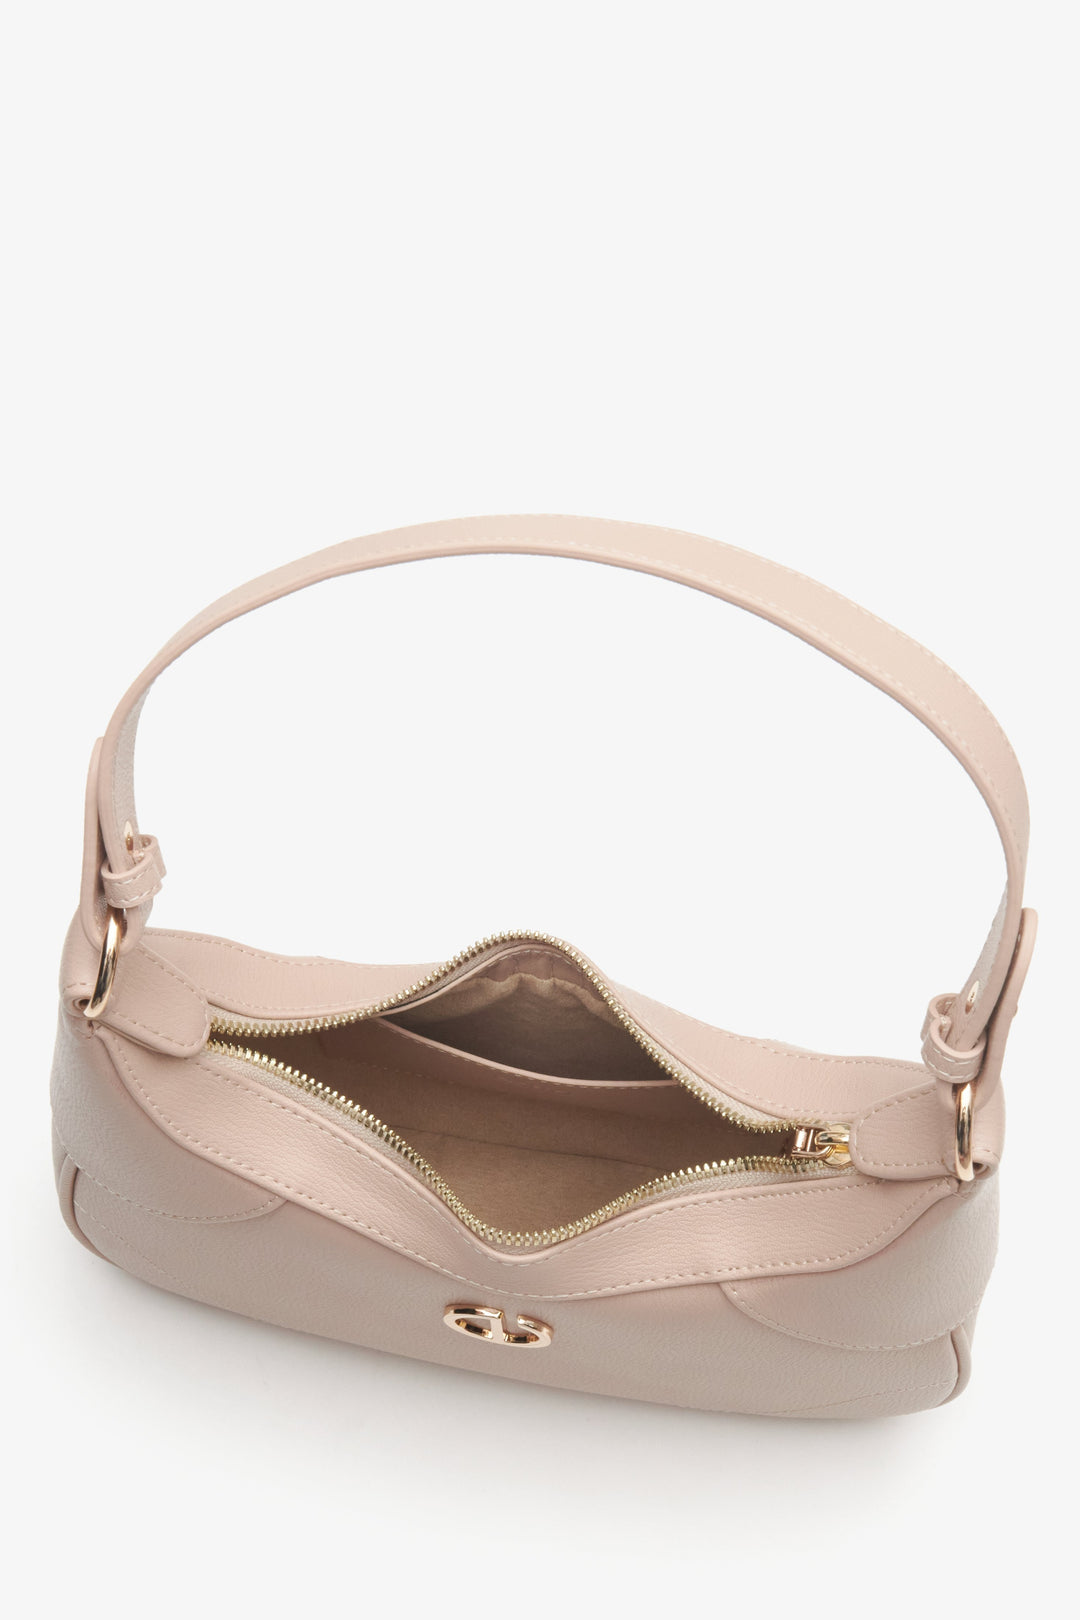 Elegant women's pale pink bag - a close-up on the main compartment.